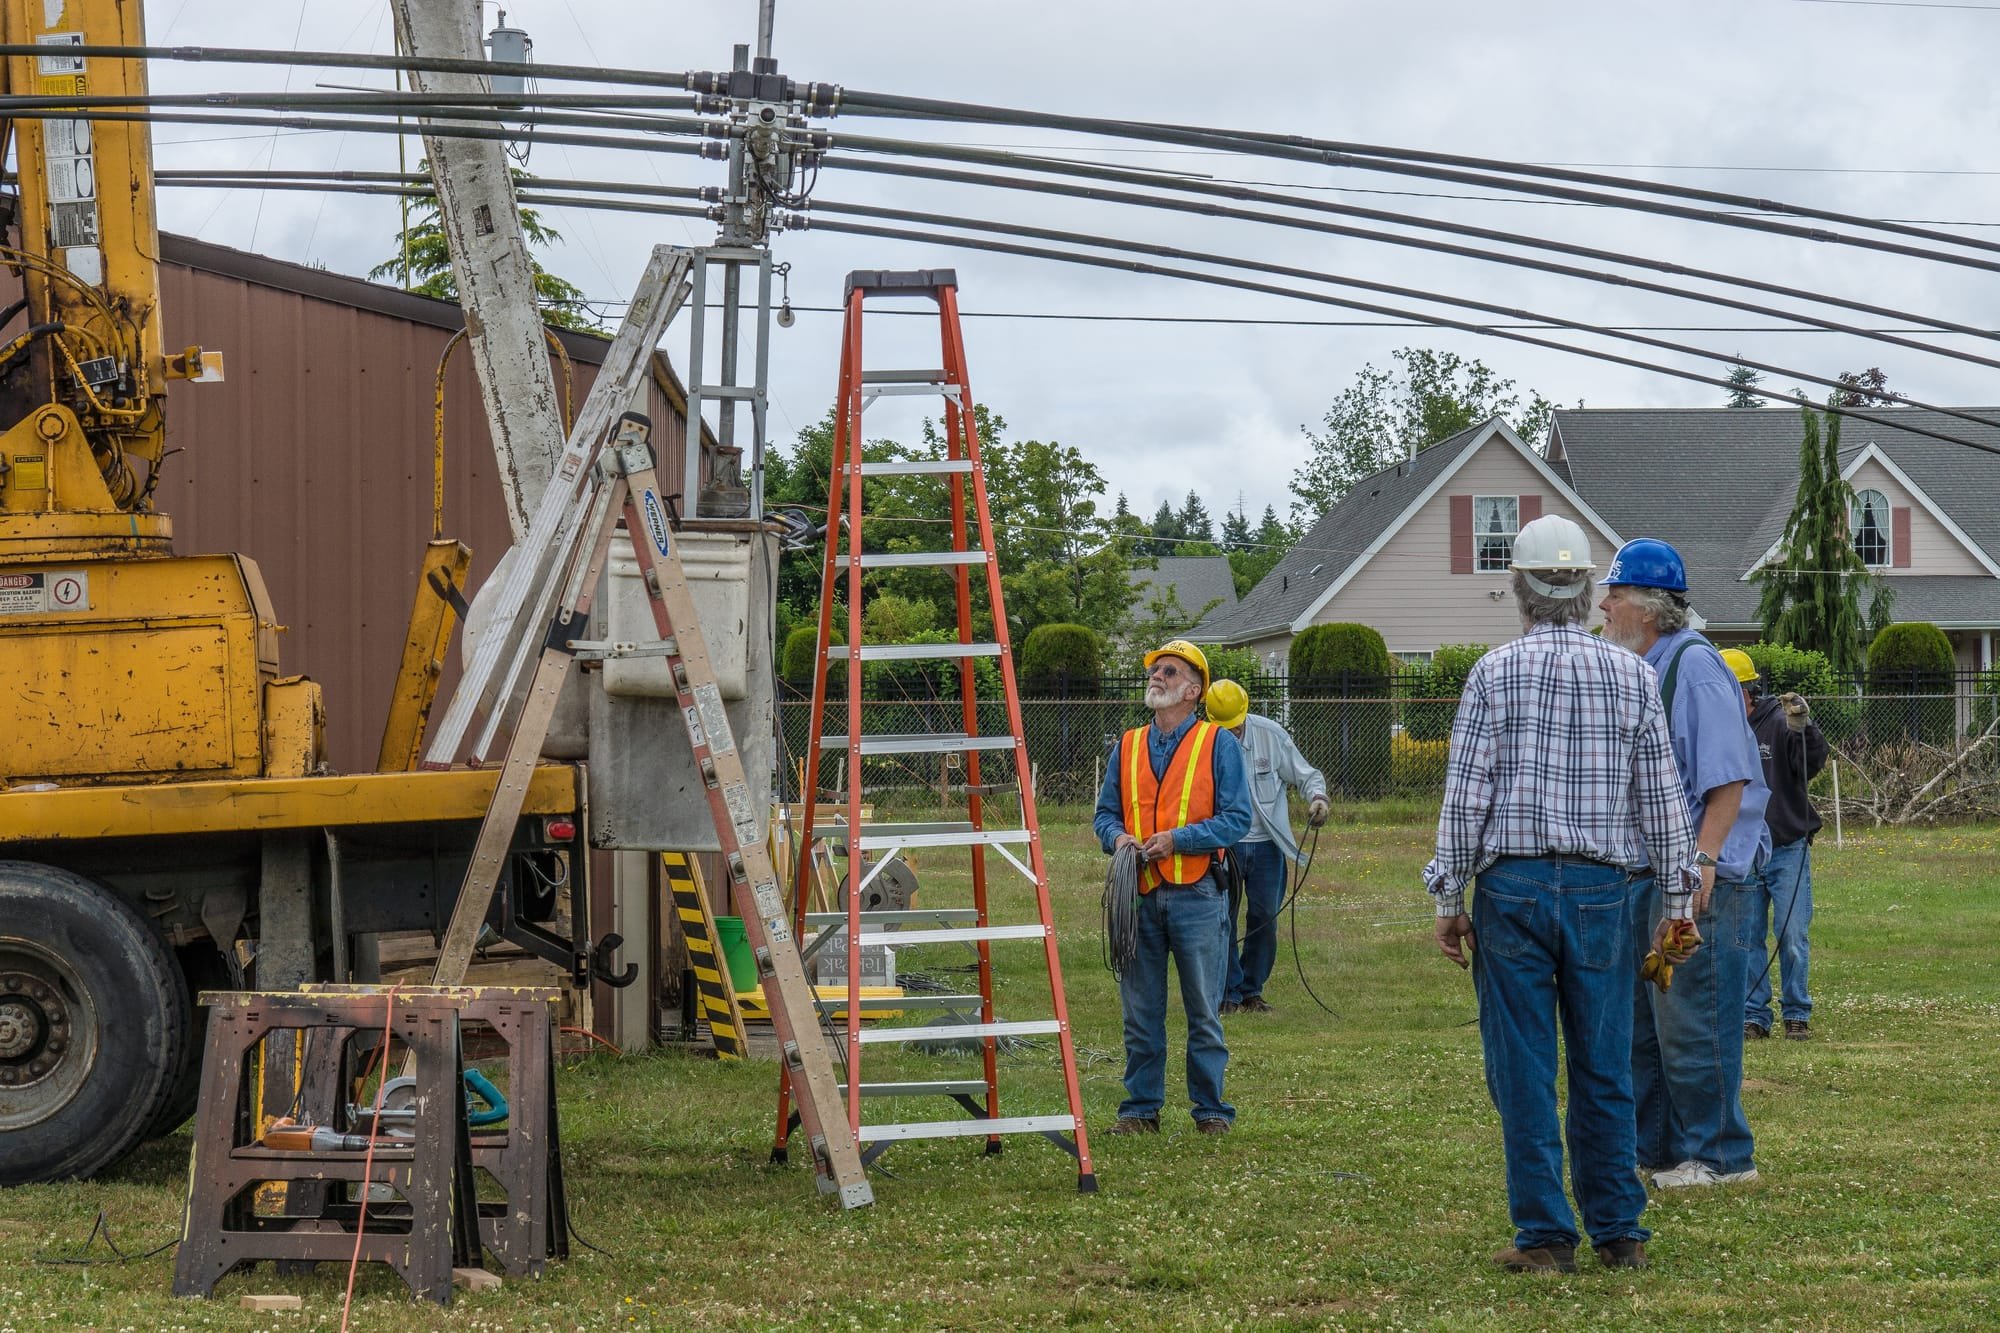 Setting up one of the Field Day antennas